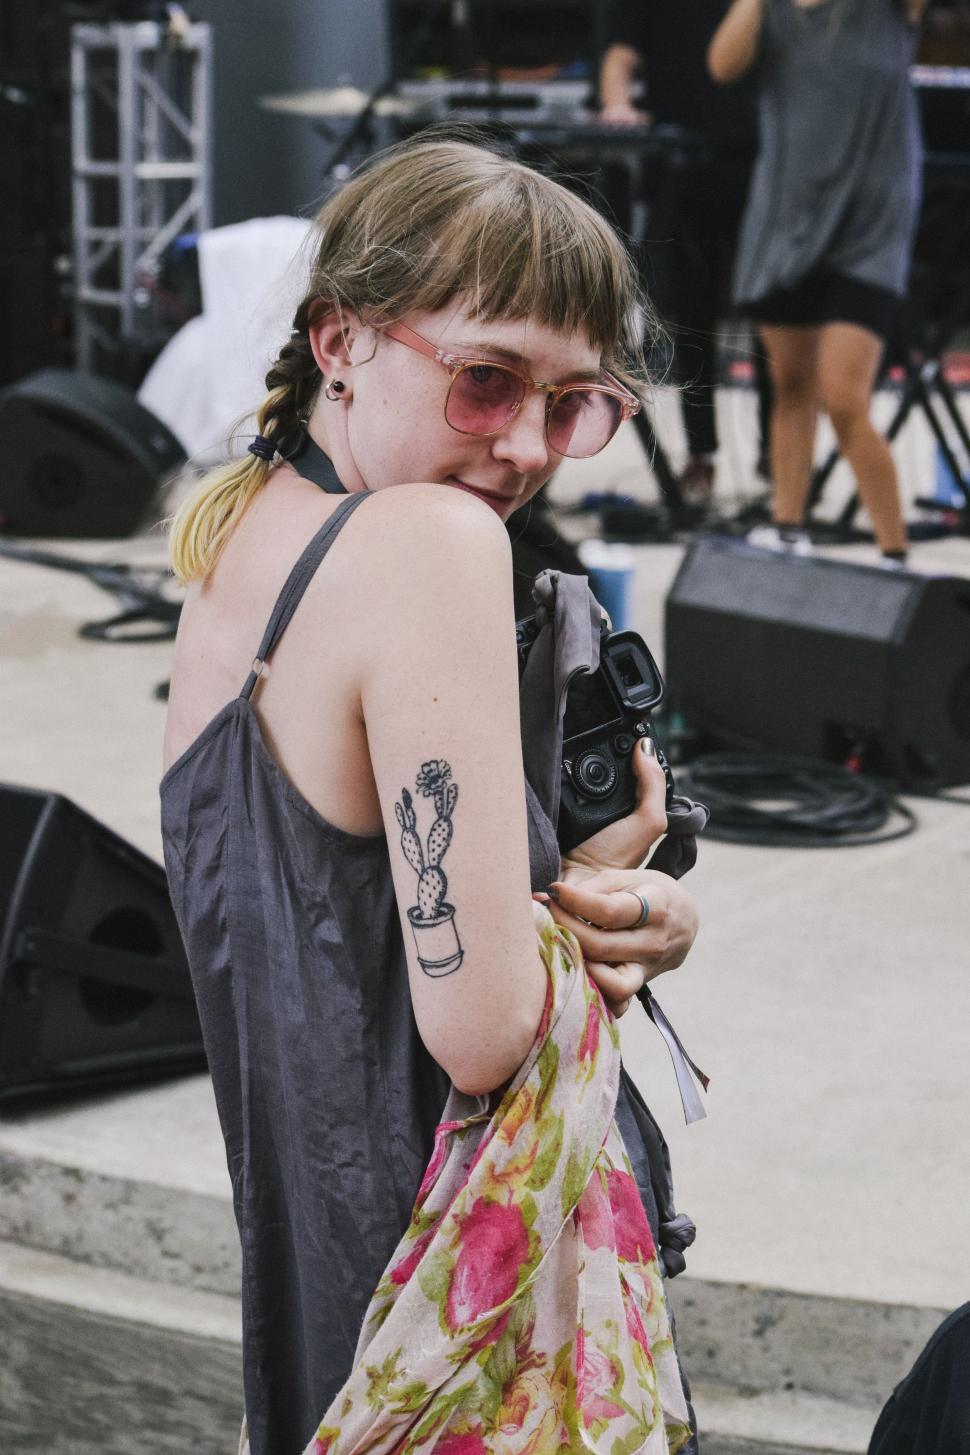 Free Image of Woman With Tattoo Holding Camera 